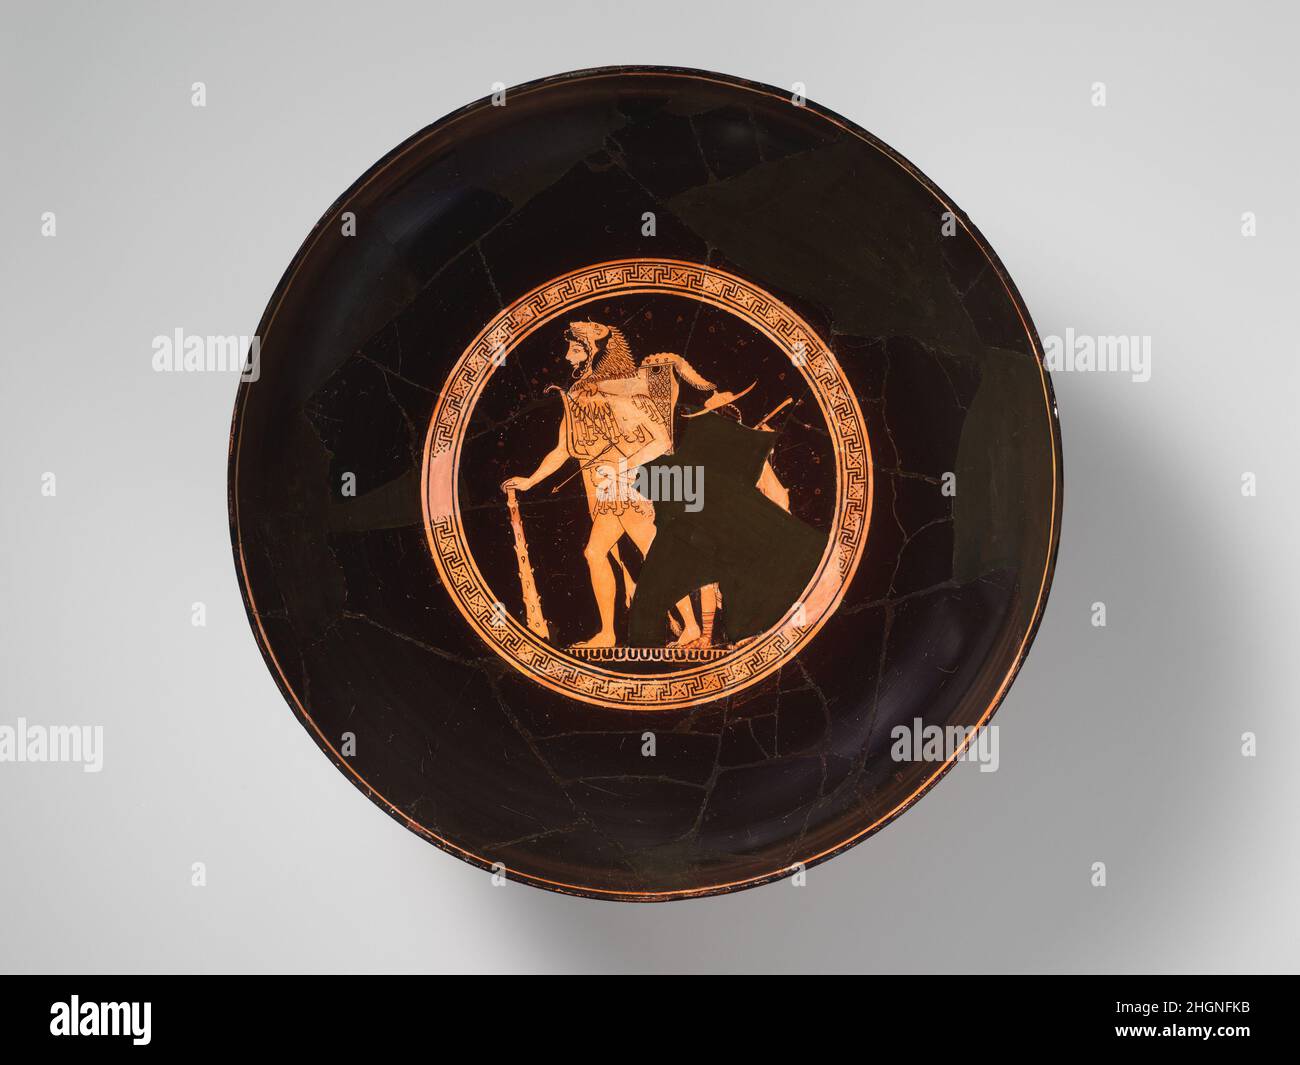 Terracotta kylix (drinking cup) ca. 490 B.C. Signed by Euphronios Interior, Herakles and young boyExterior, Herakles fighting the sons of Eurytos; Herakles fighting OpsEuphronios is probably the best known of the early red-figure artists called the Pioneers. During the latter part of his career, he signs as potter rather than painter, and he collaborates with various painters of whom Onesimos is one of the most accomplished. The representation on the interior shows the almost coloristic effects that Onesimos achieved with dilute glaze as well as his marvelous characterization of Herakles—young Stock Photo